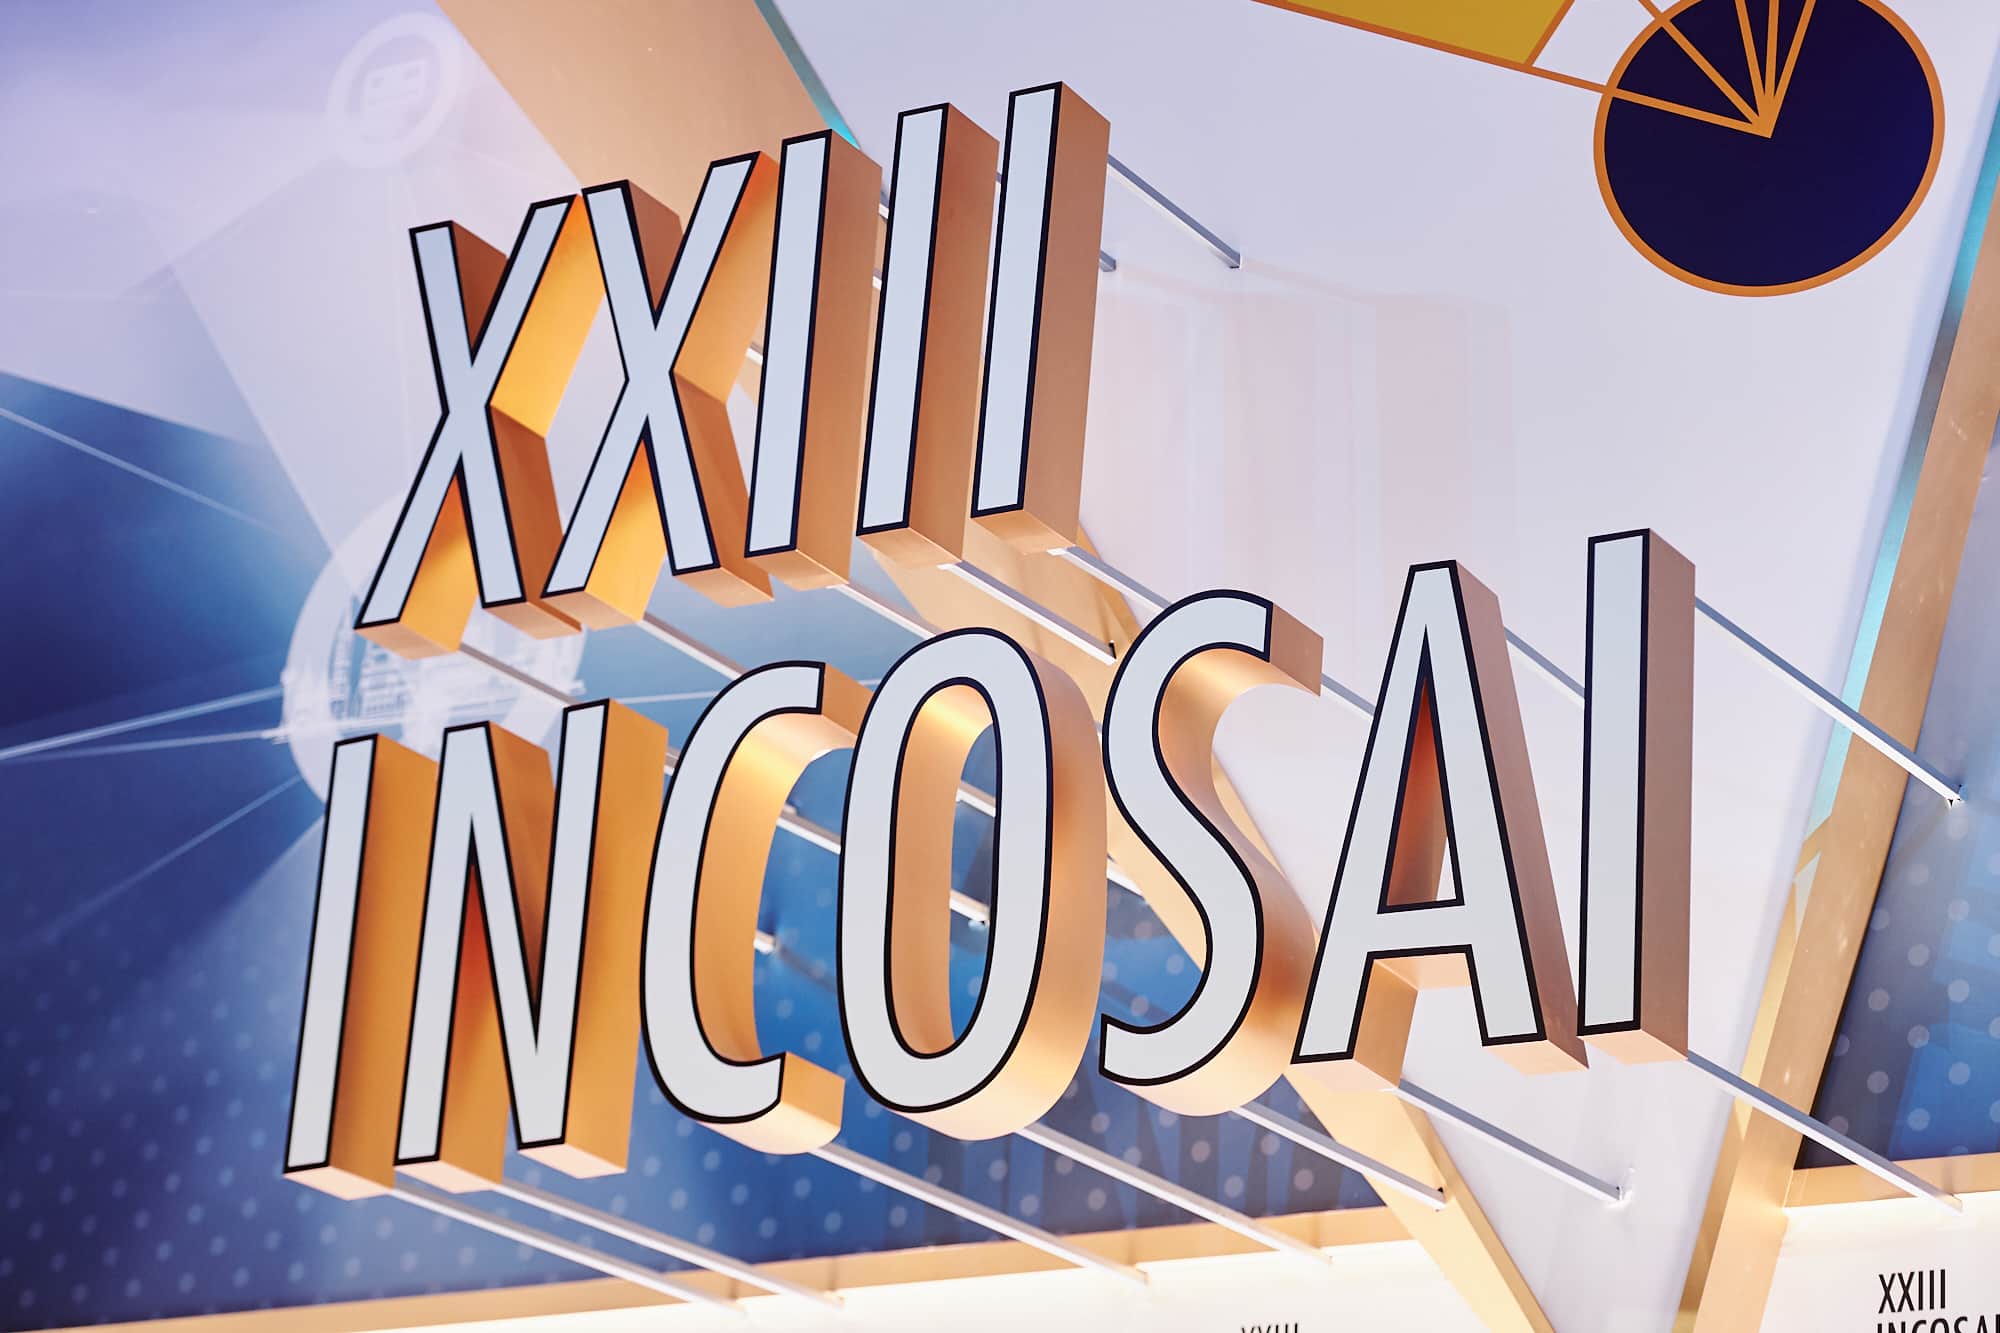 INCOSAI XXIII: discussion on maintaining sustainable development in the age of Great Disruption